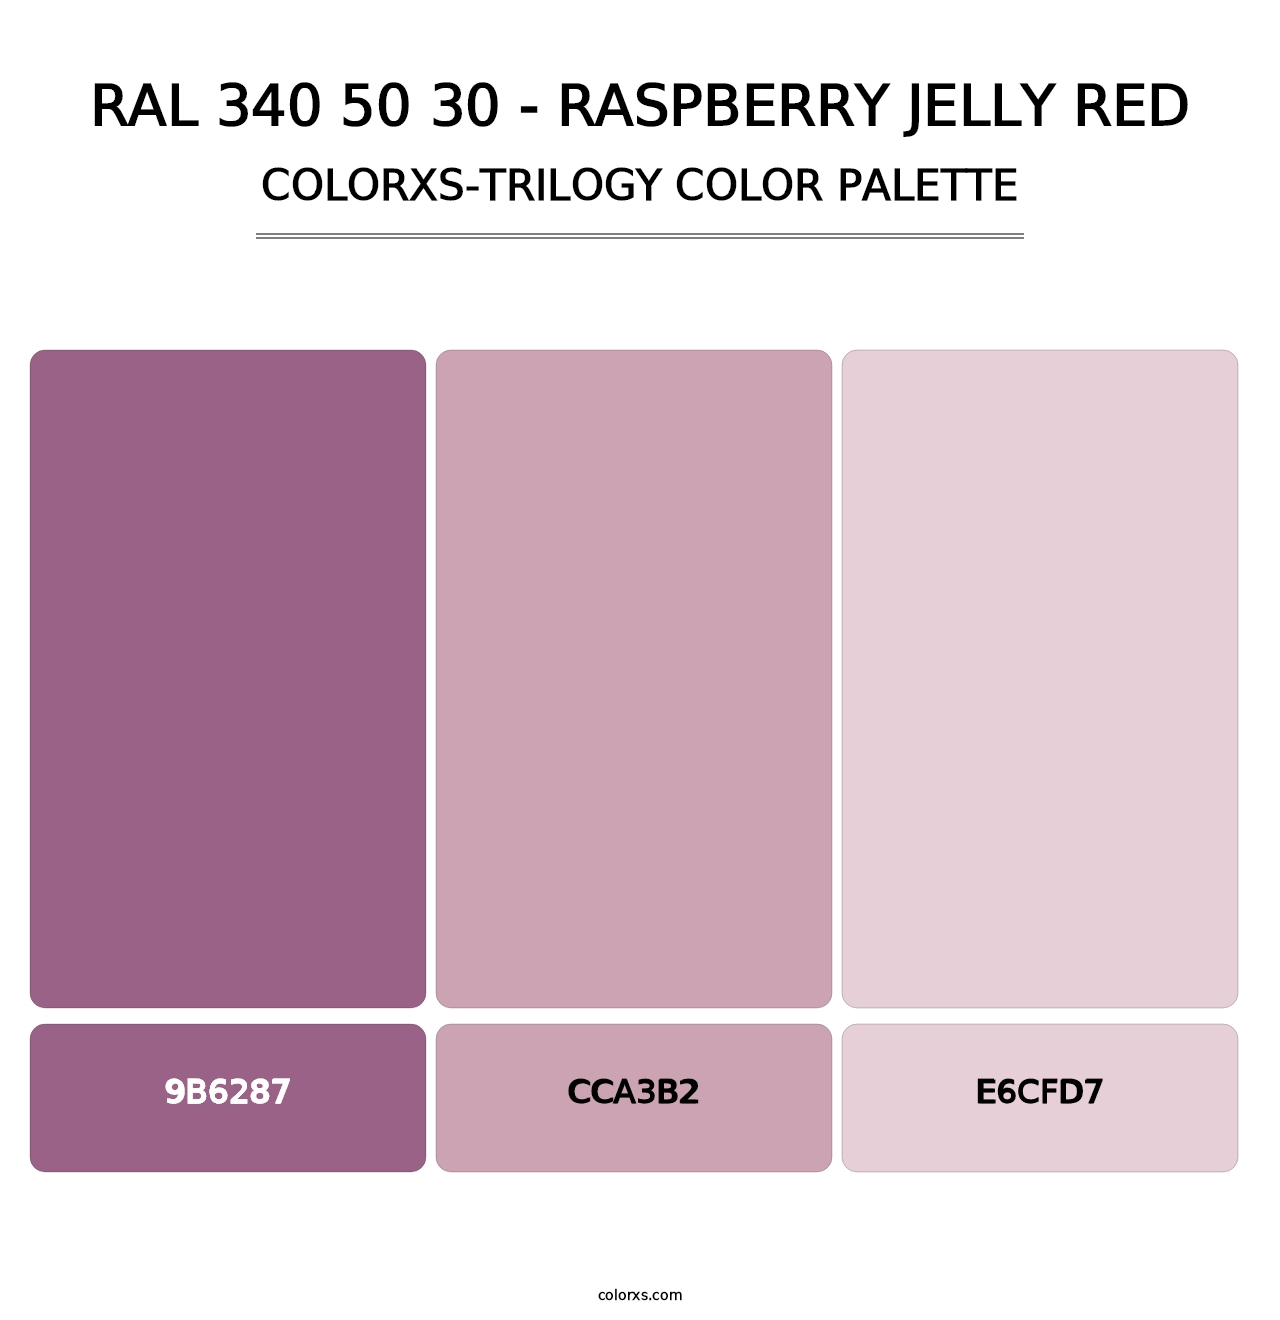 RAL 340 50 30 - Raspberry Jelly Red - Colorxs Trilogy Palette